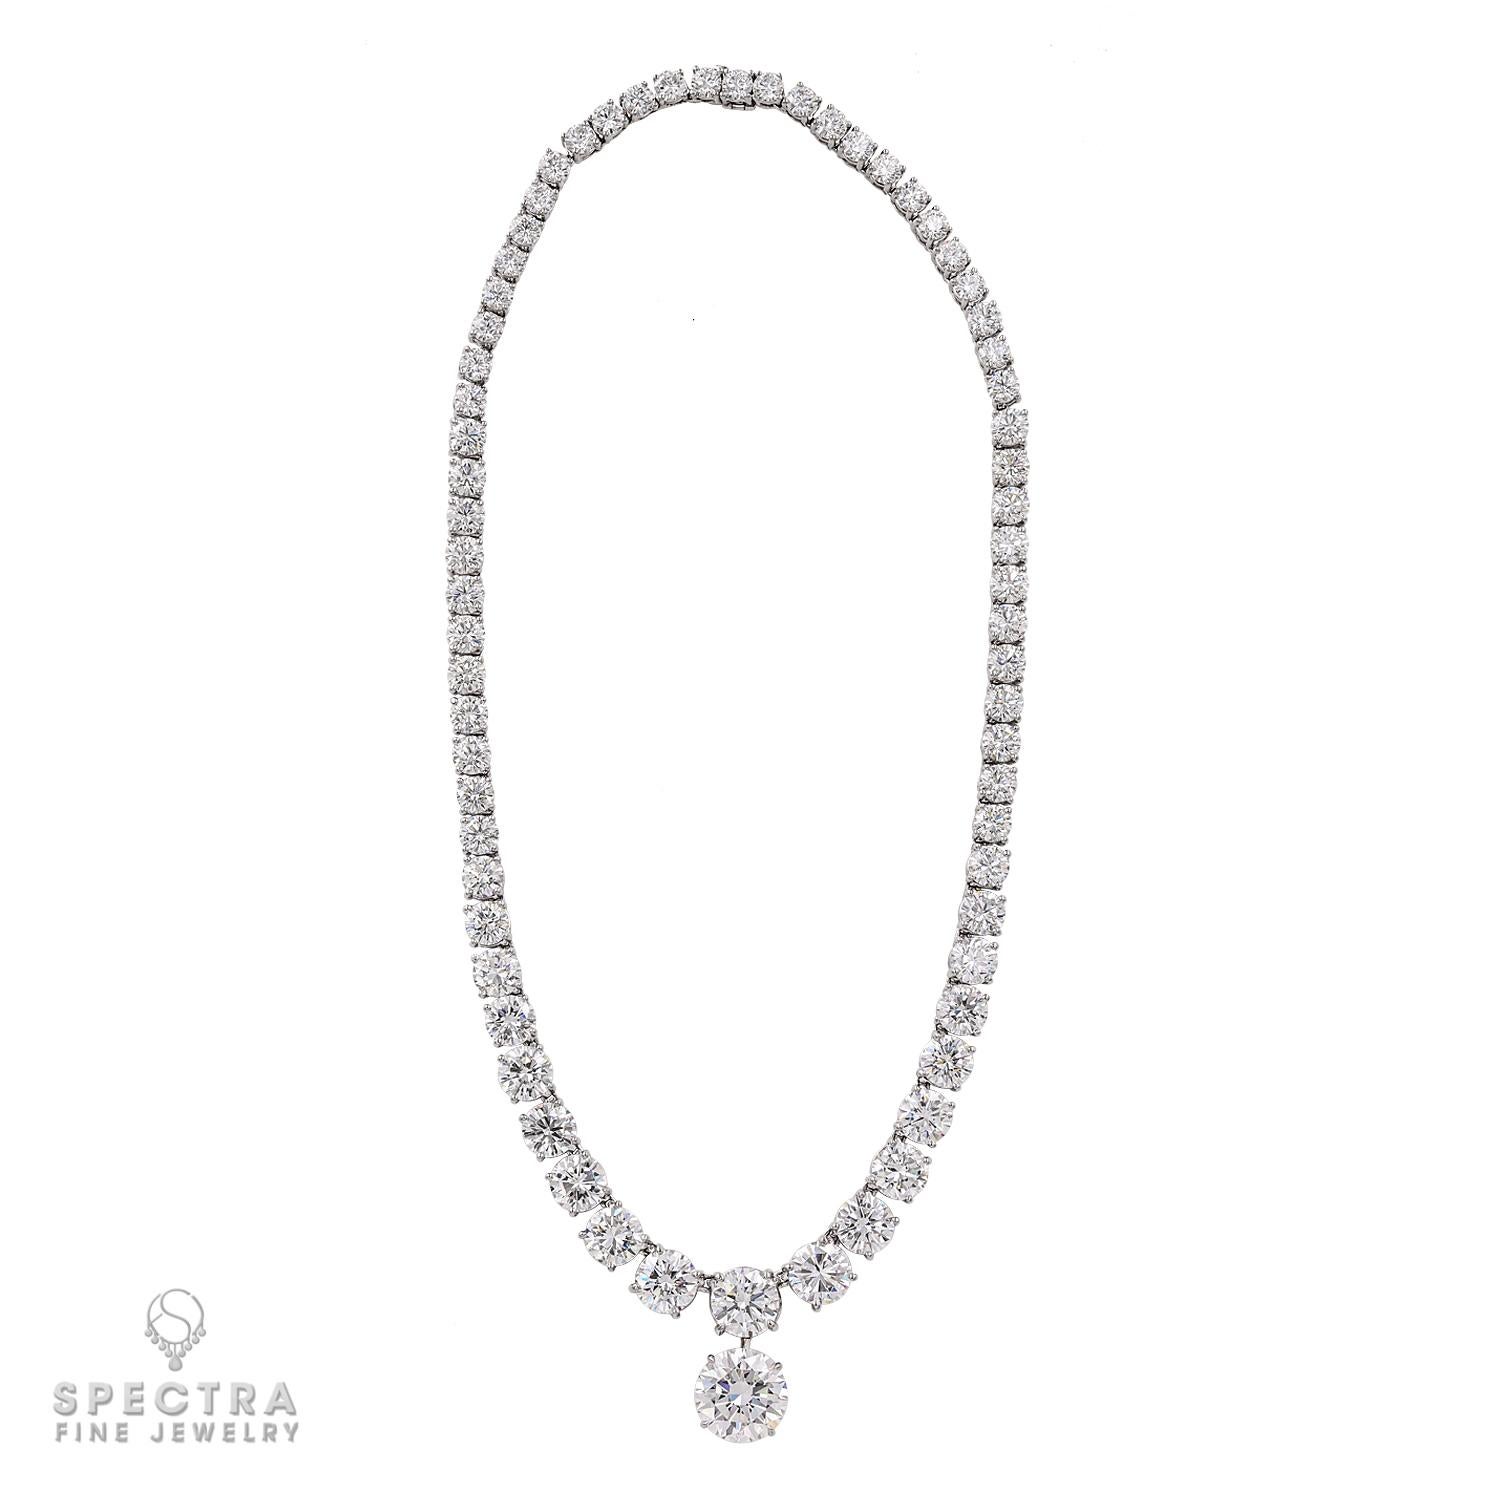 Haute-joaillerie diamond necklace riviera style with a diamond pendant. The necklace is comprising of 67 graduated round-cut diamonds, mounted in platinum. 16 diamonds are GIA certified weighing from 0.73 carats to 3 carats. The colors are from D to